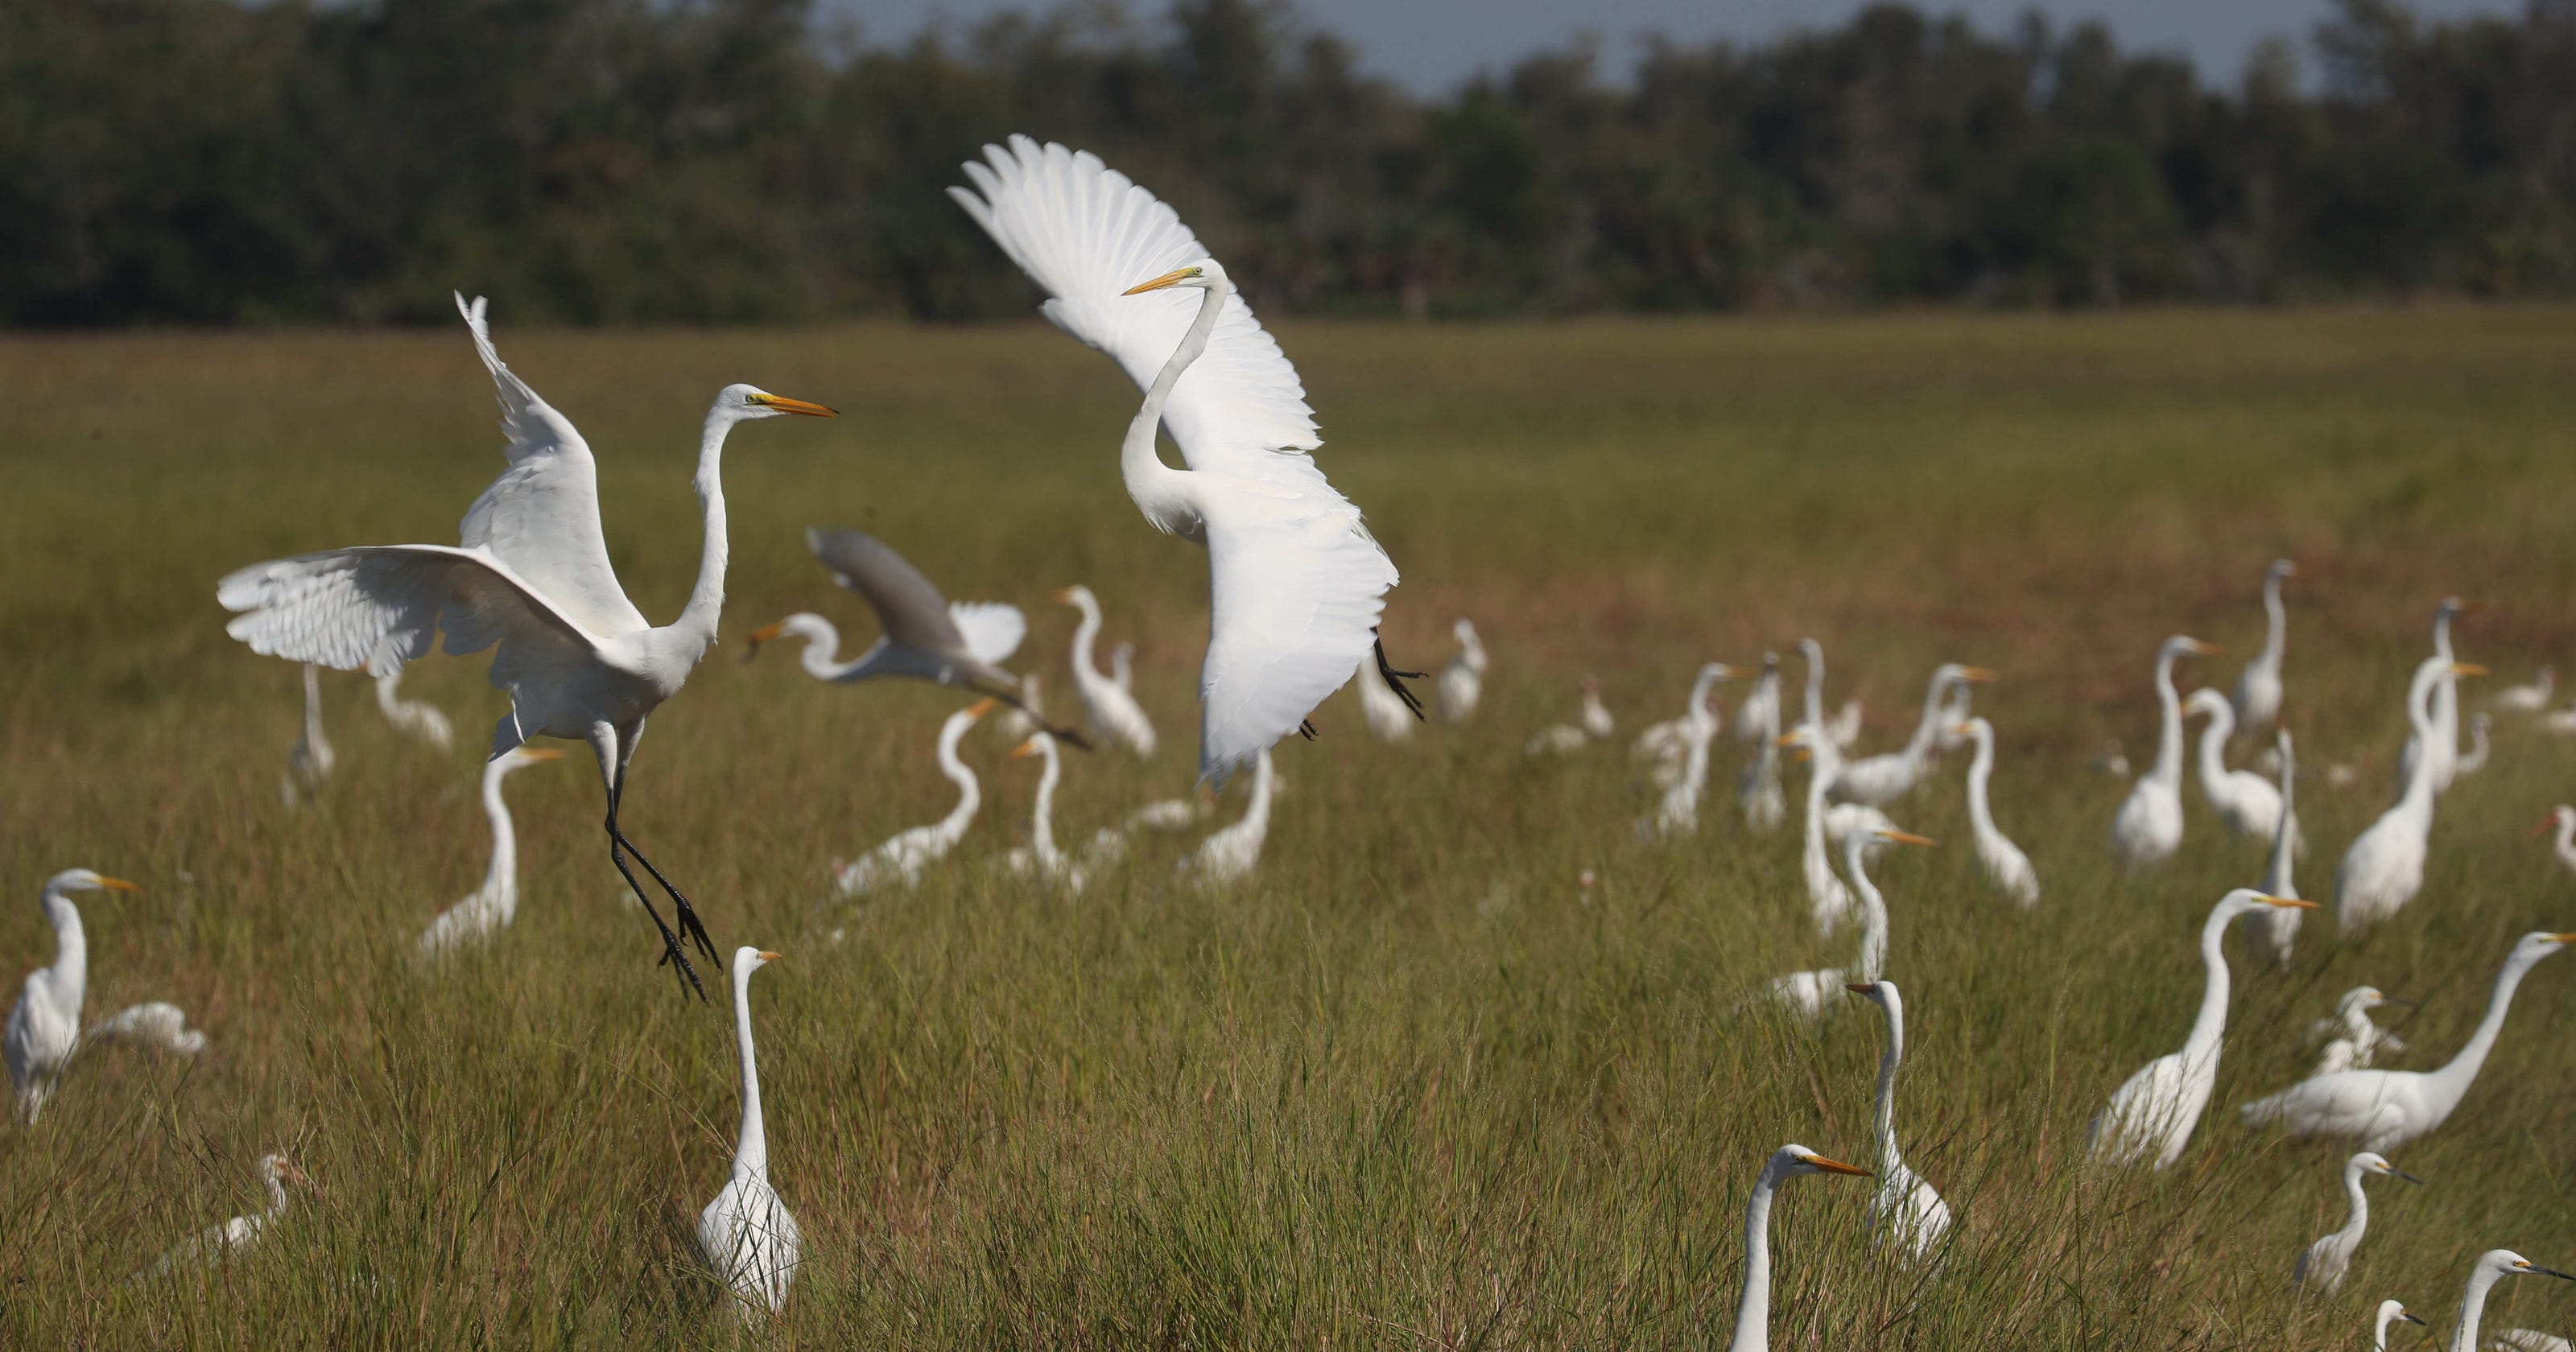 Is that a heron or an egret? Our guide to the region #39 s white birds can help